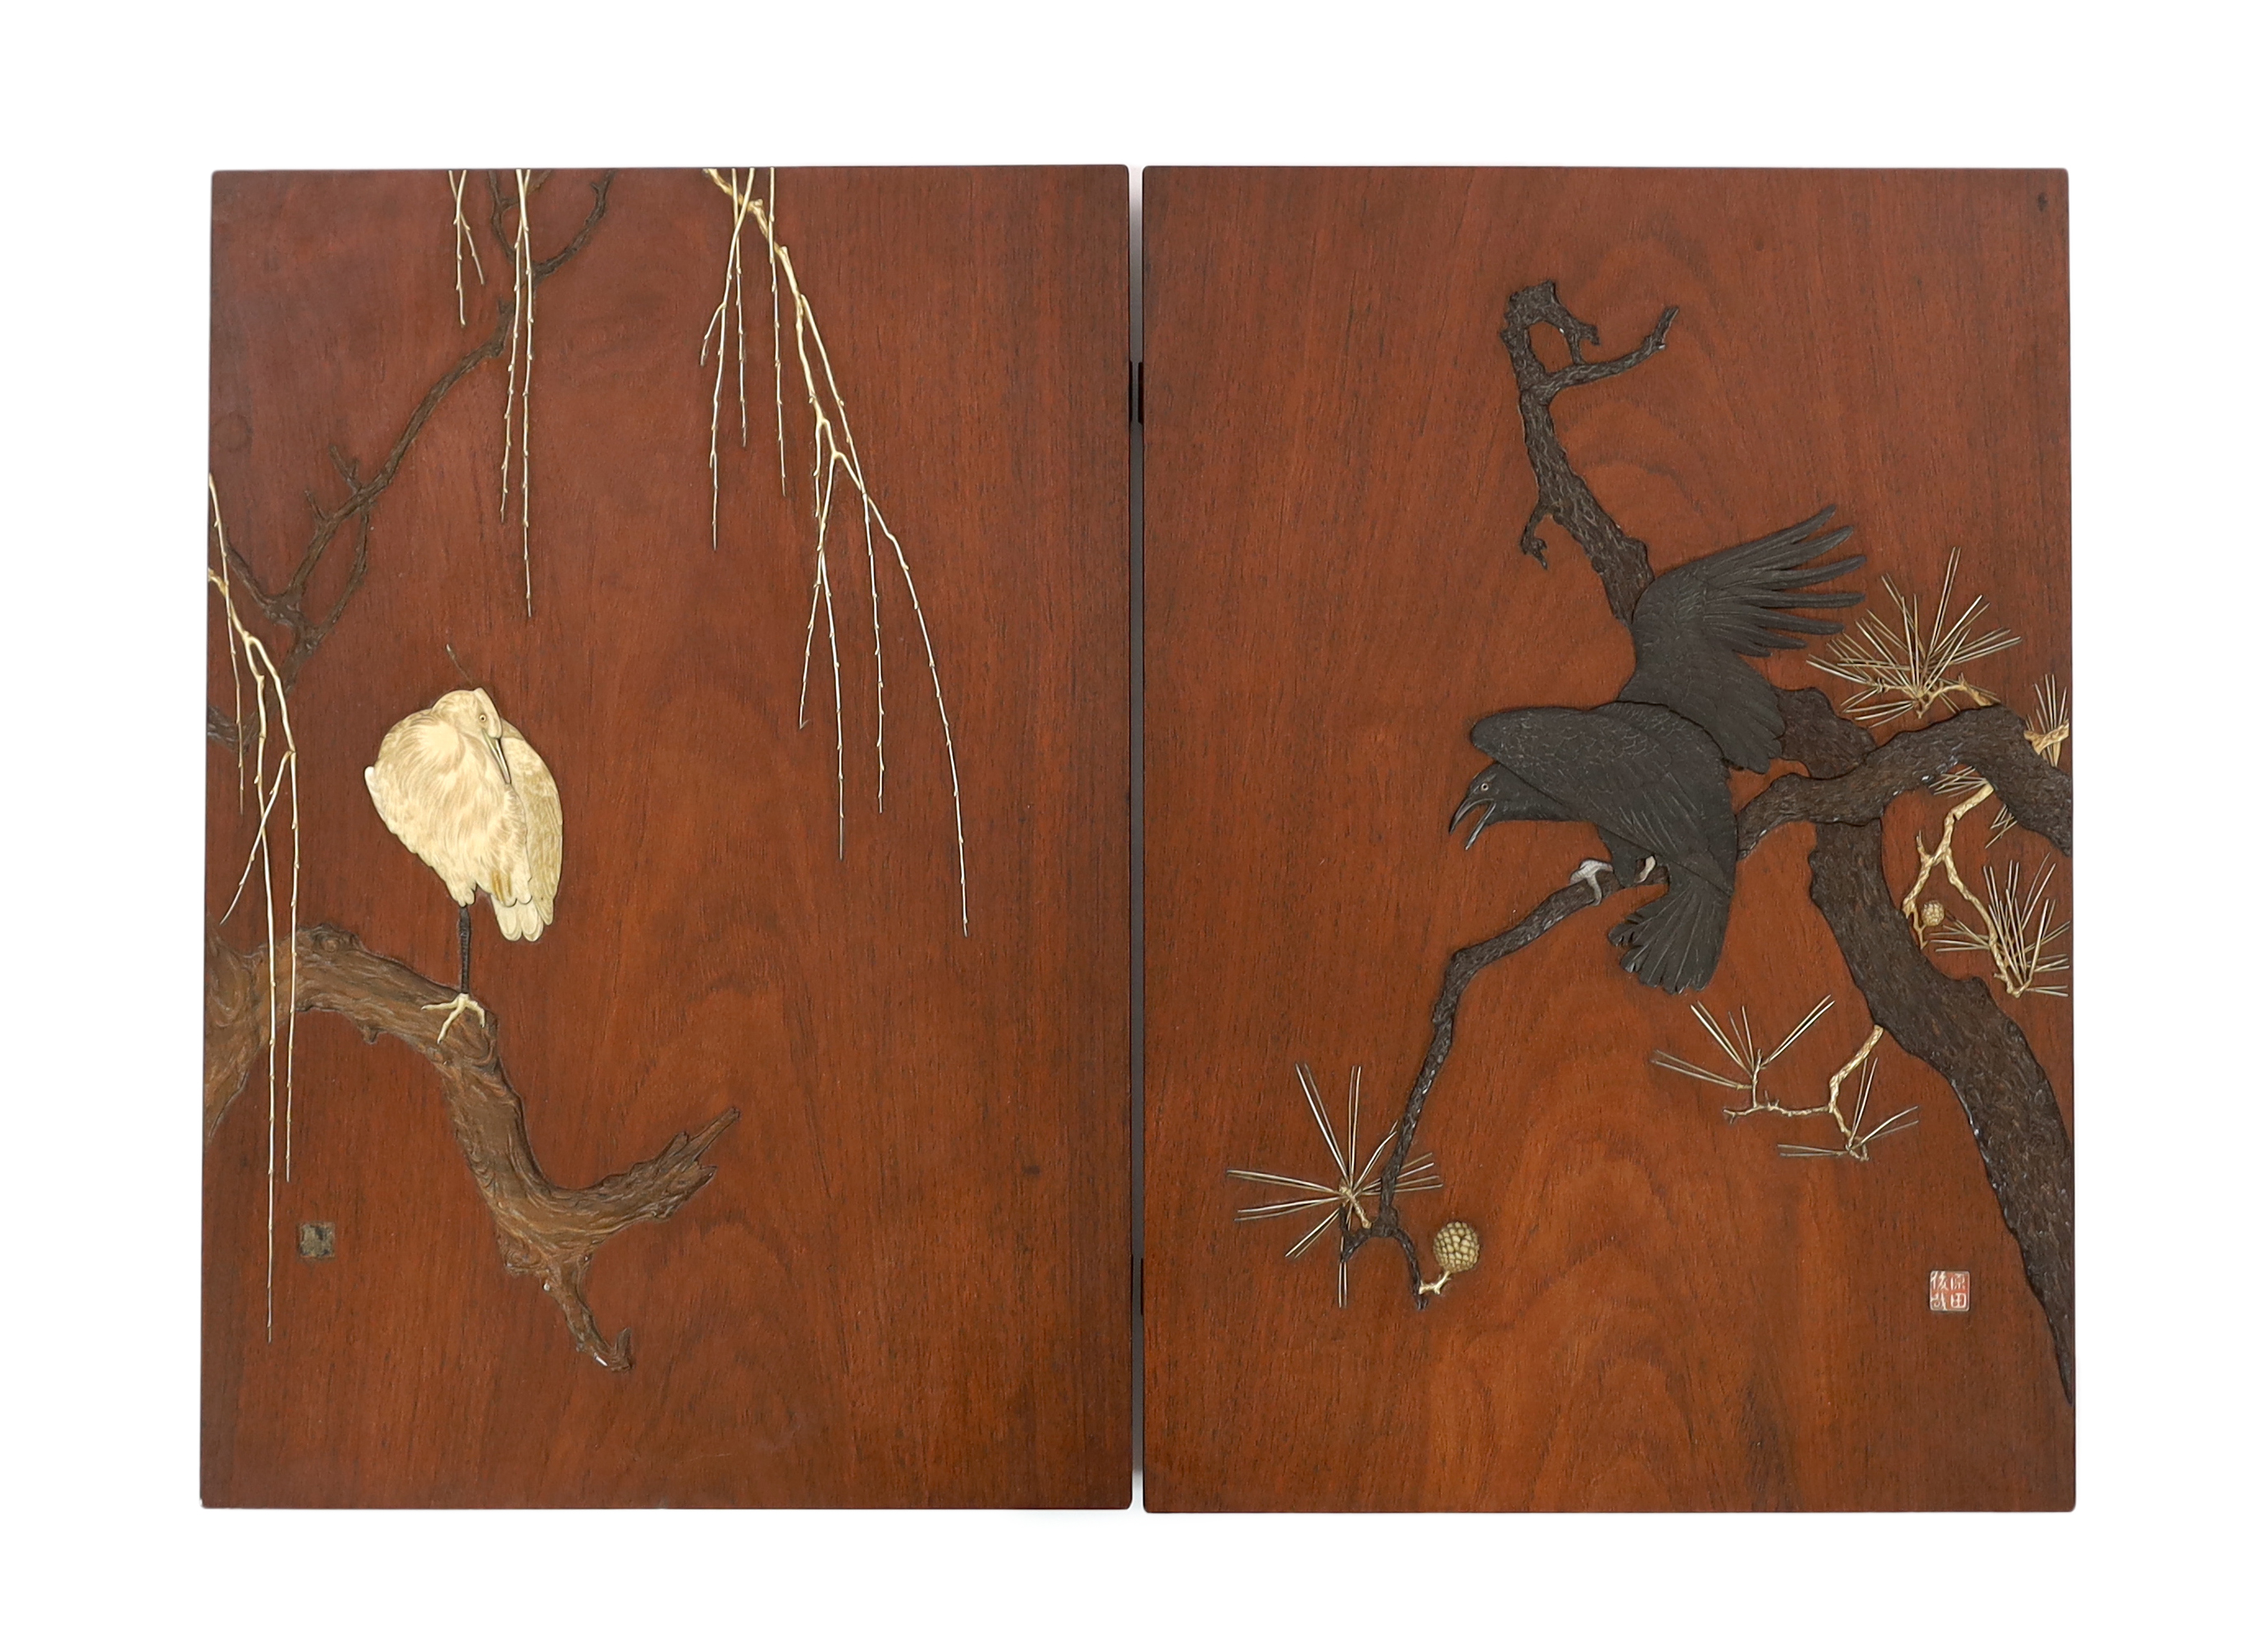 Two Japanese Shibayama type inlaid panels, 19th century, CITES Submission reference XNPLXS1W